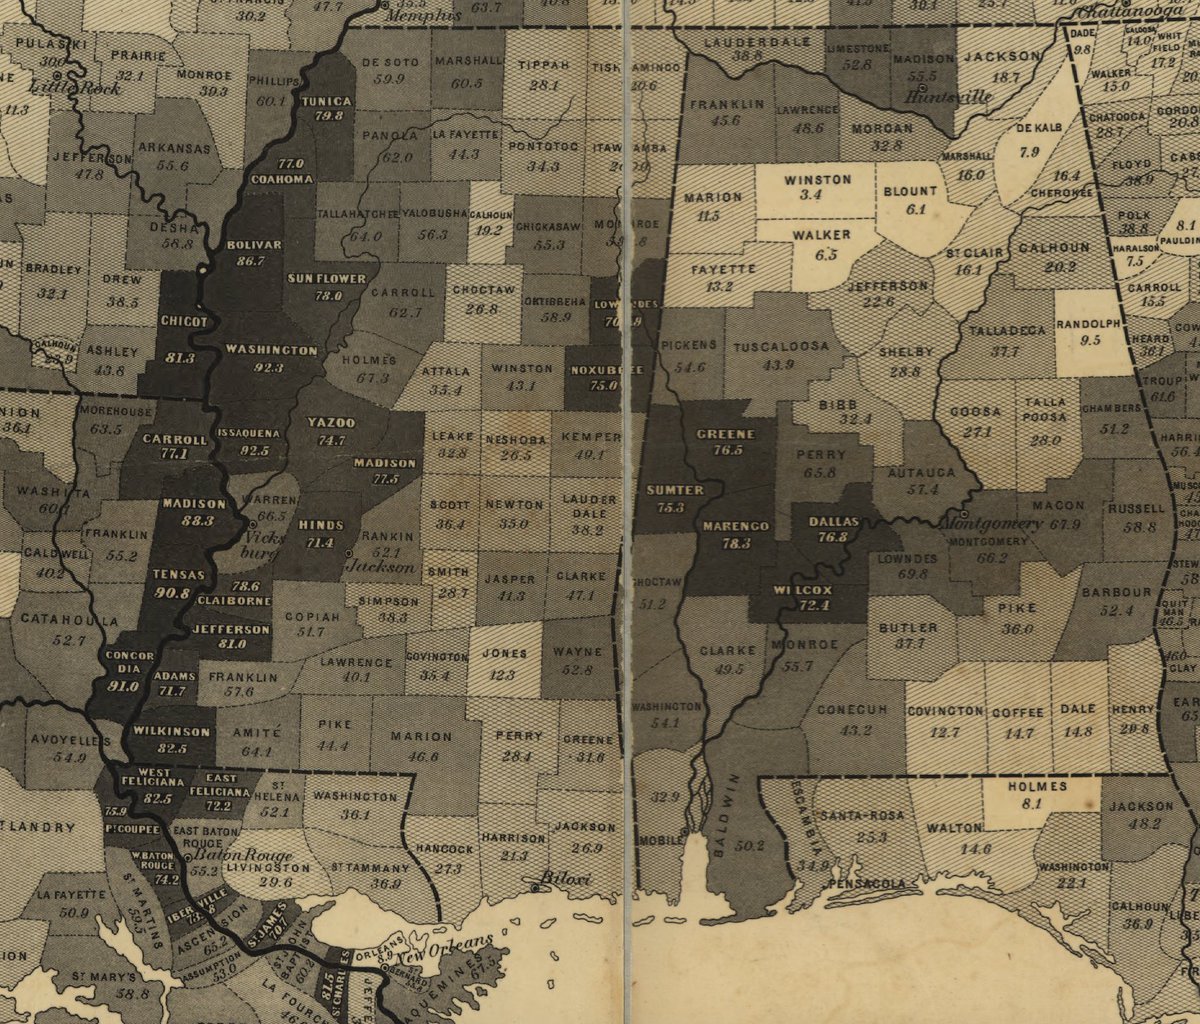 This map of slavery from 1860 shows the importance of soil differences better than the 1856 political/transportation map. The "Black Prairie" in eastern Mississippi clearly dips down into central Alabama. Also see differences between Madison and Leake or Attala Counties.